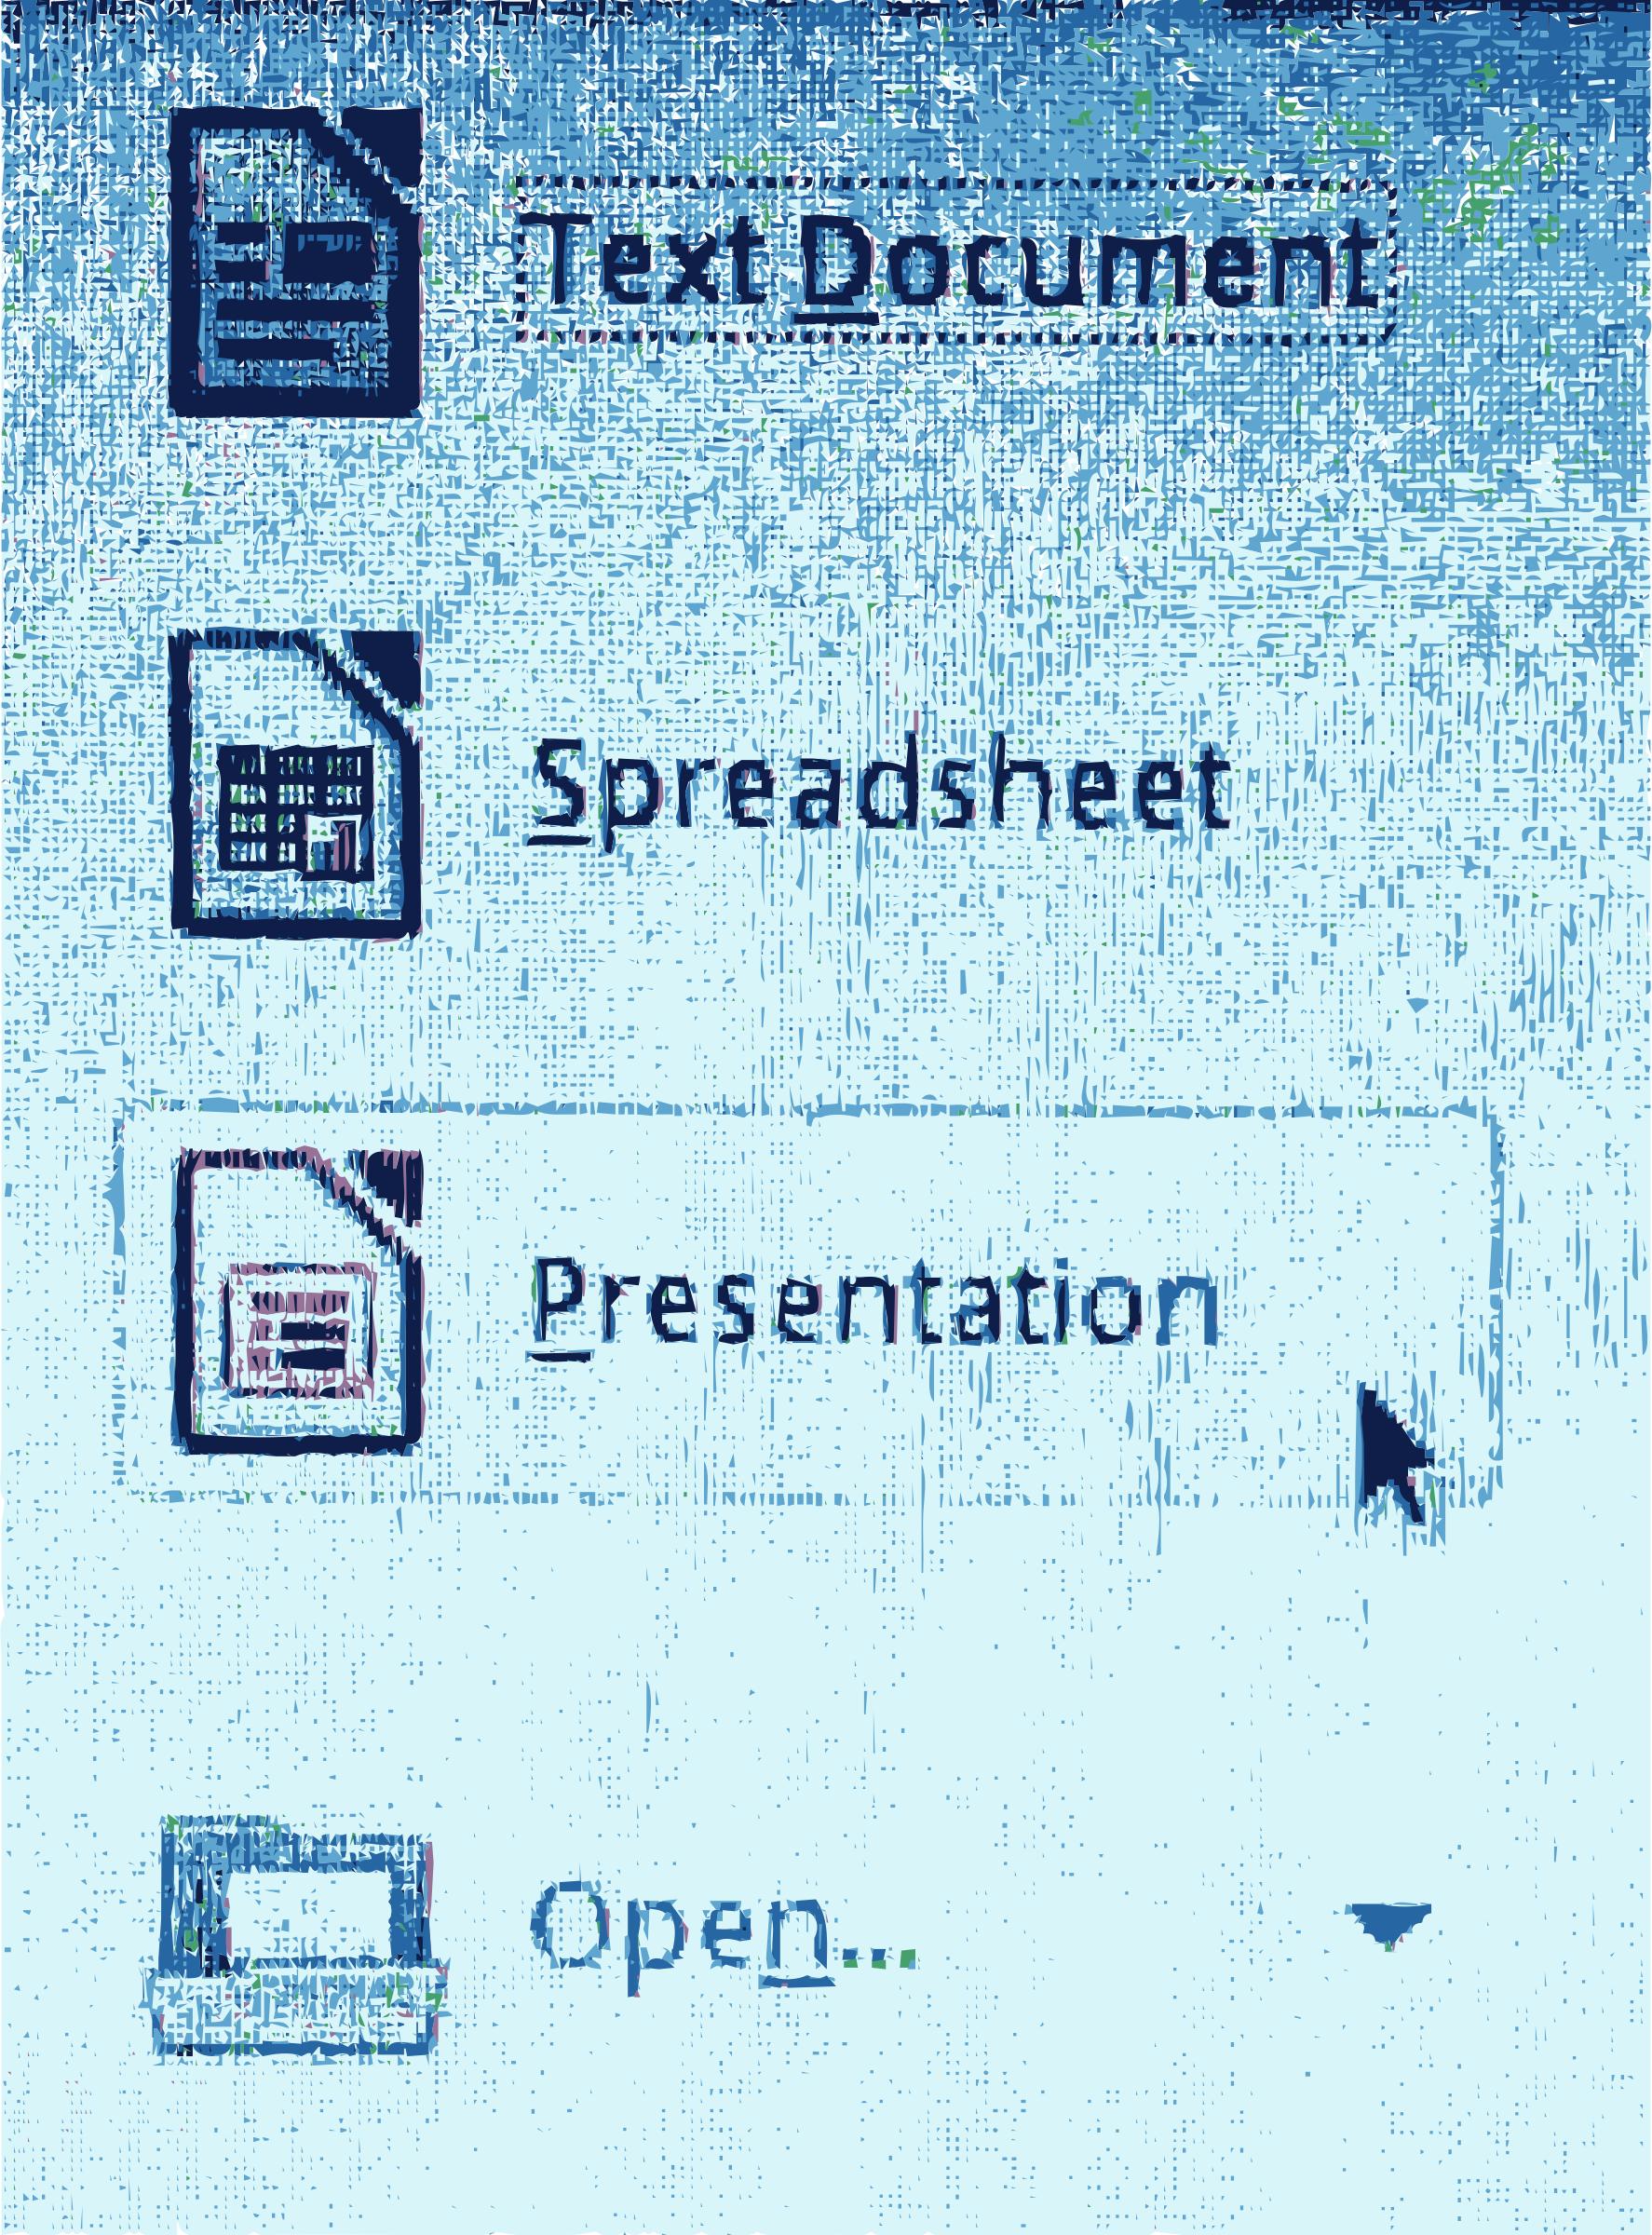 New libreoffice presentation template png